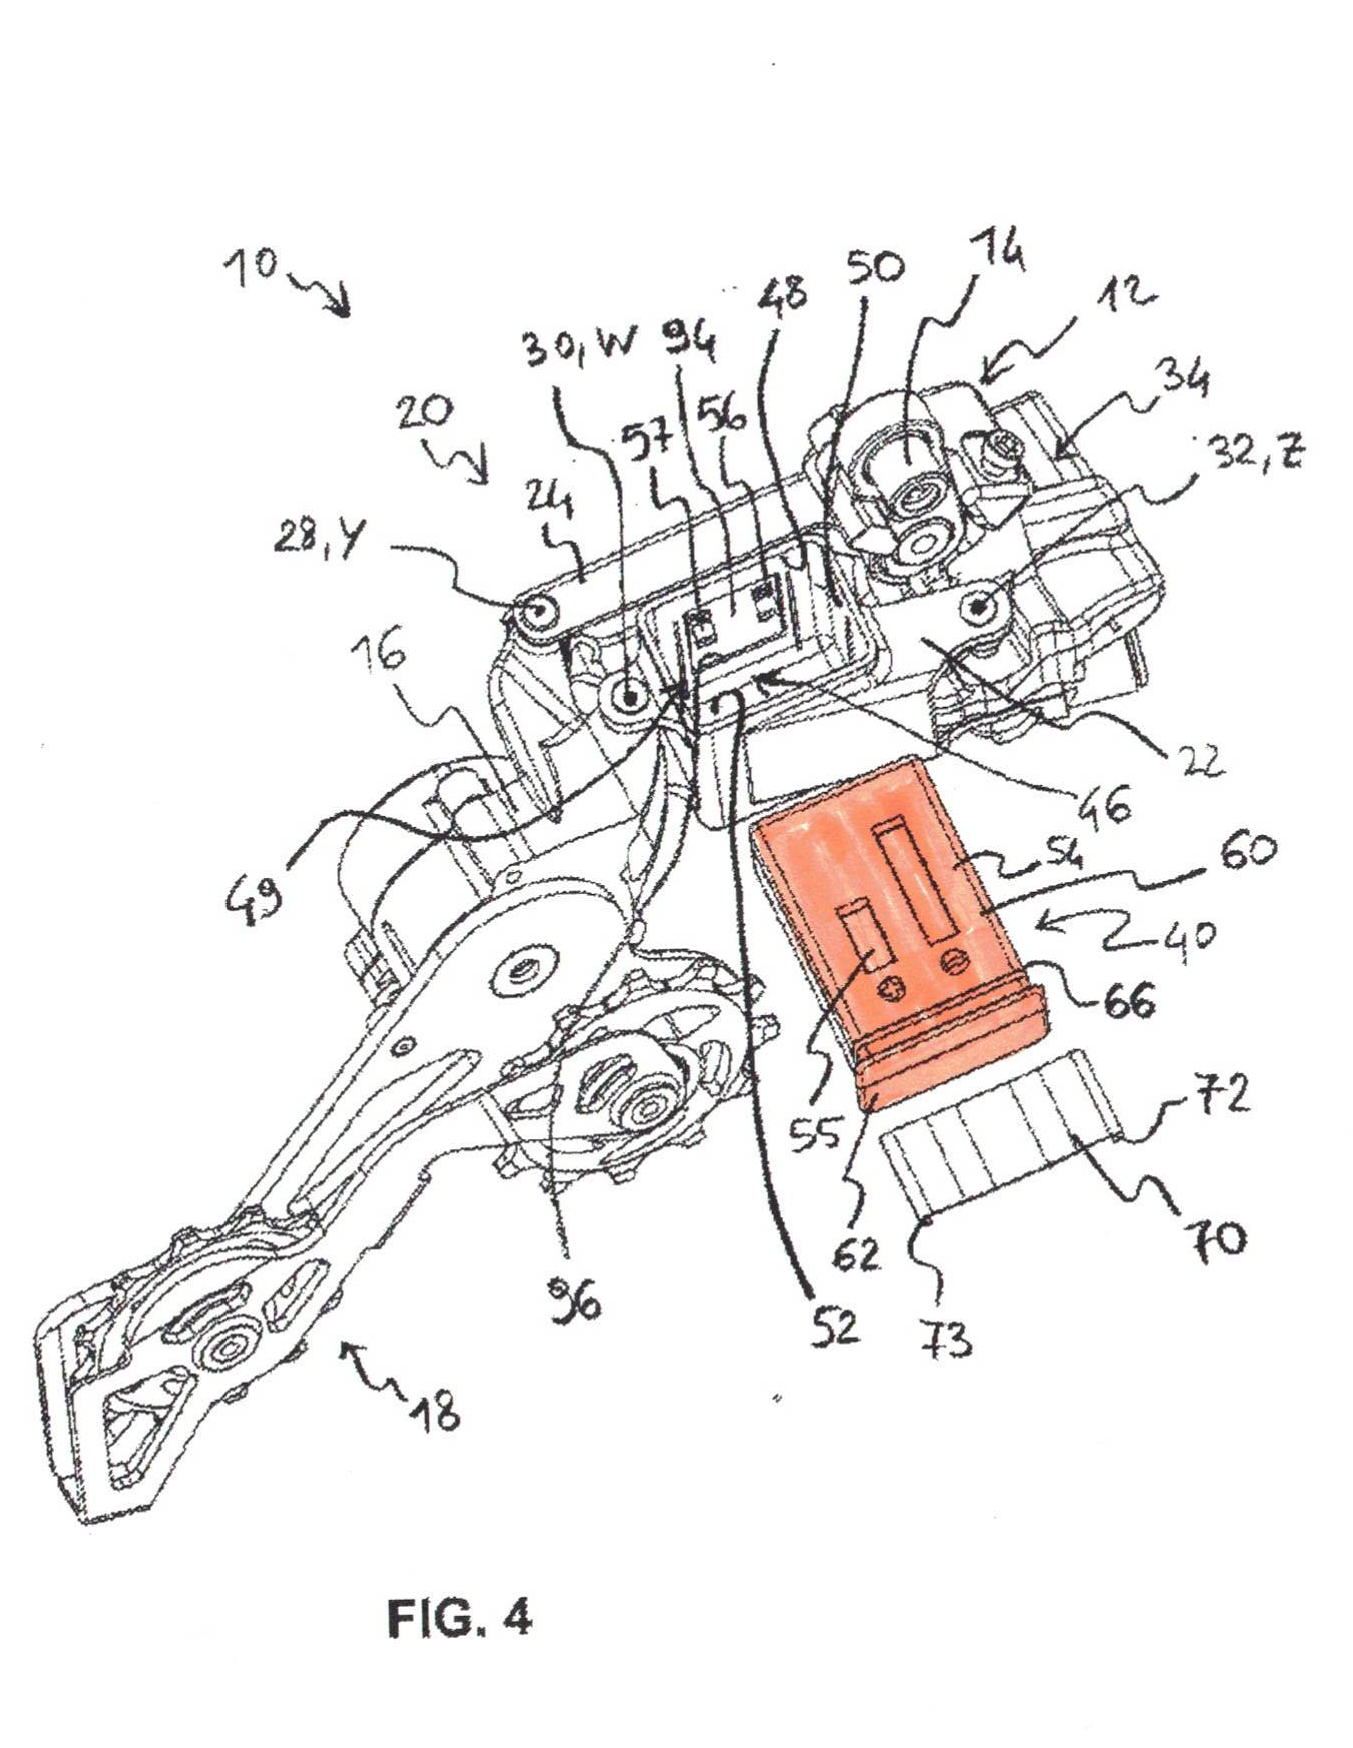 Campagnolo Wireless Shifting Patents